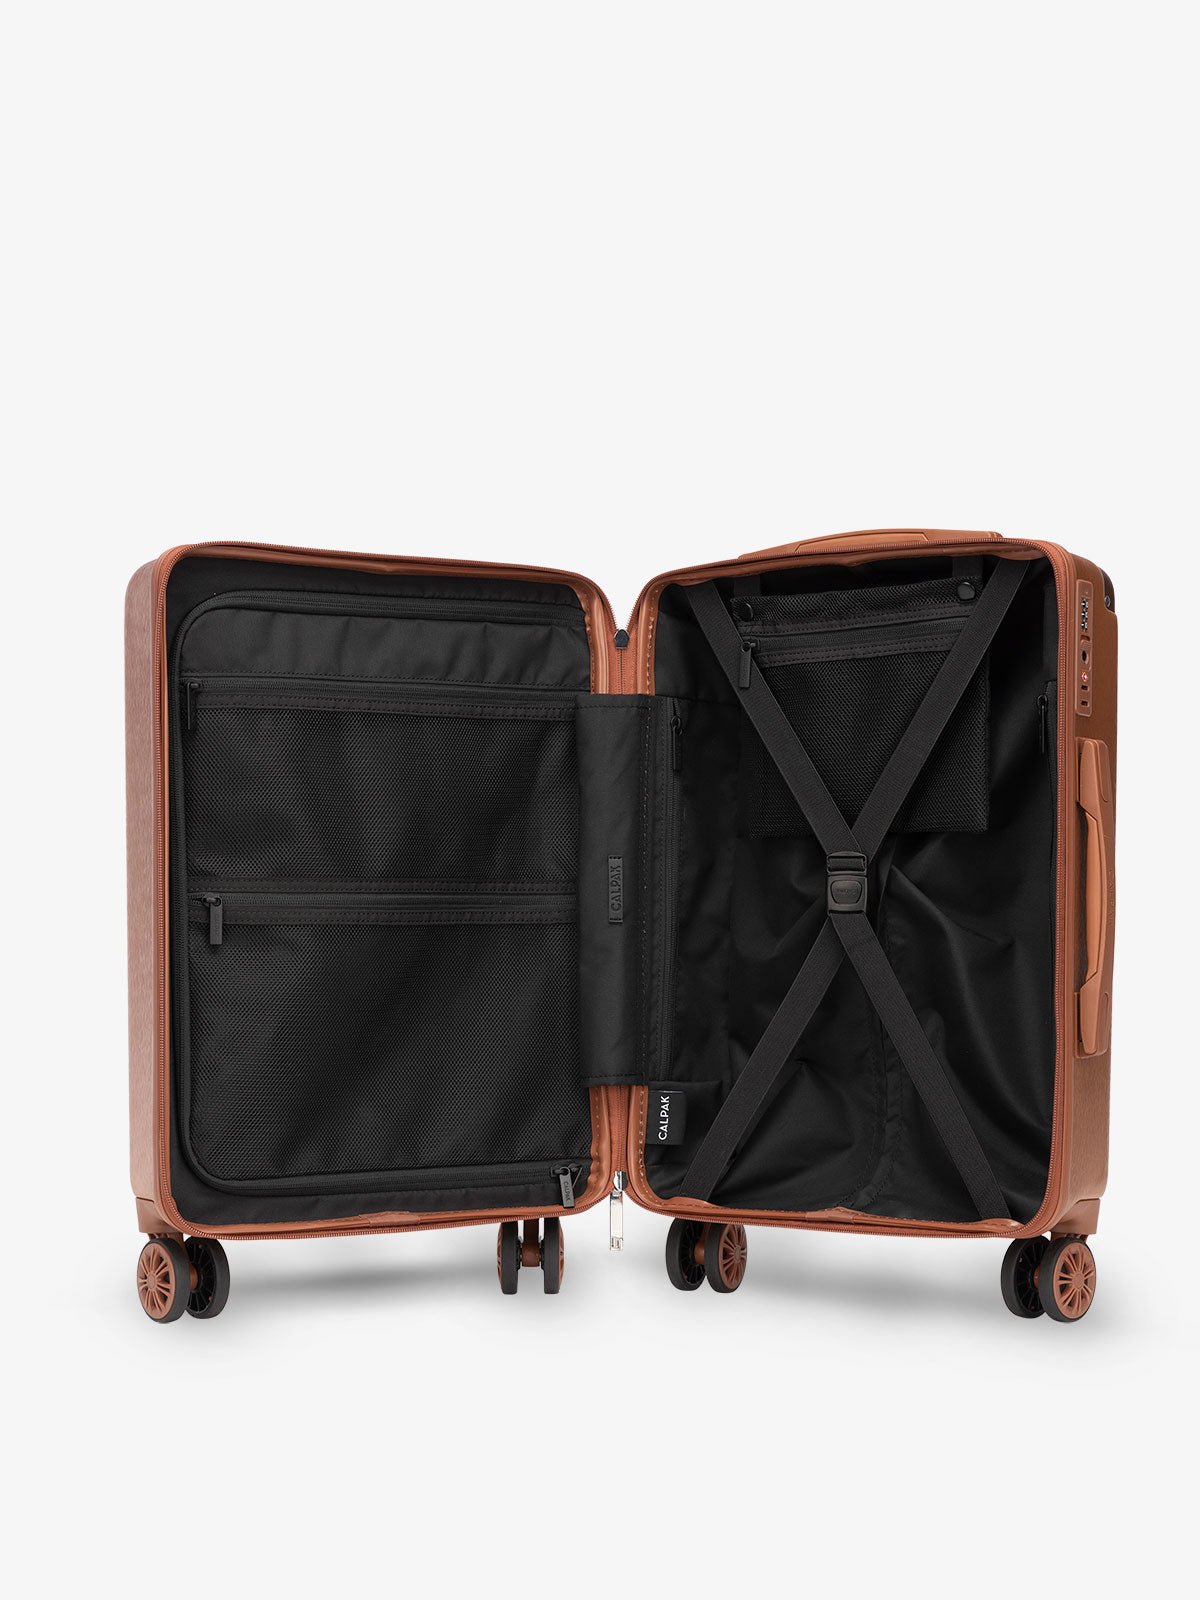 CALPAK Ambeur hard shell lightweight copper luggage with compression straps and multiple pockets